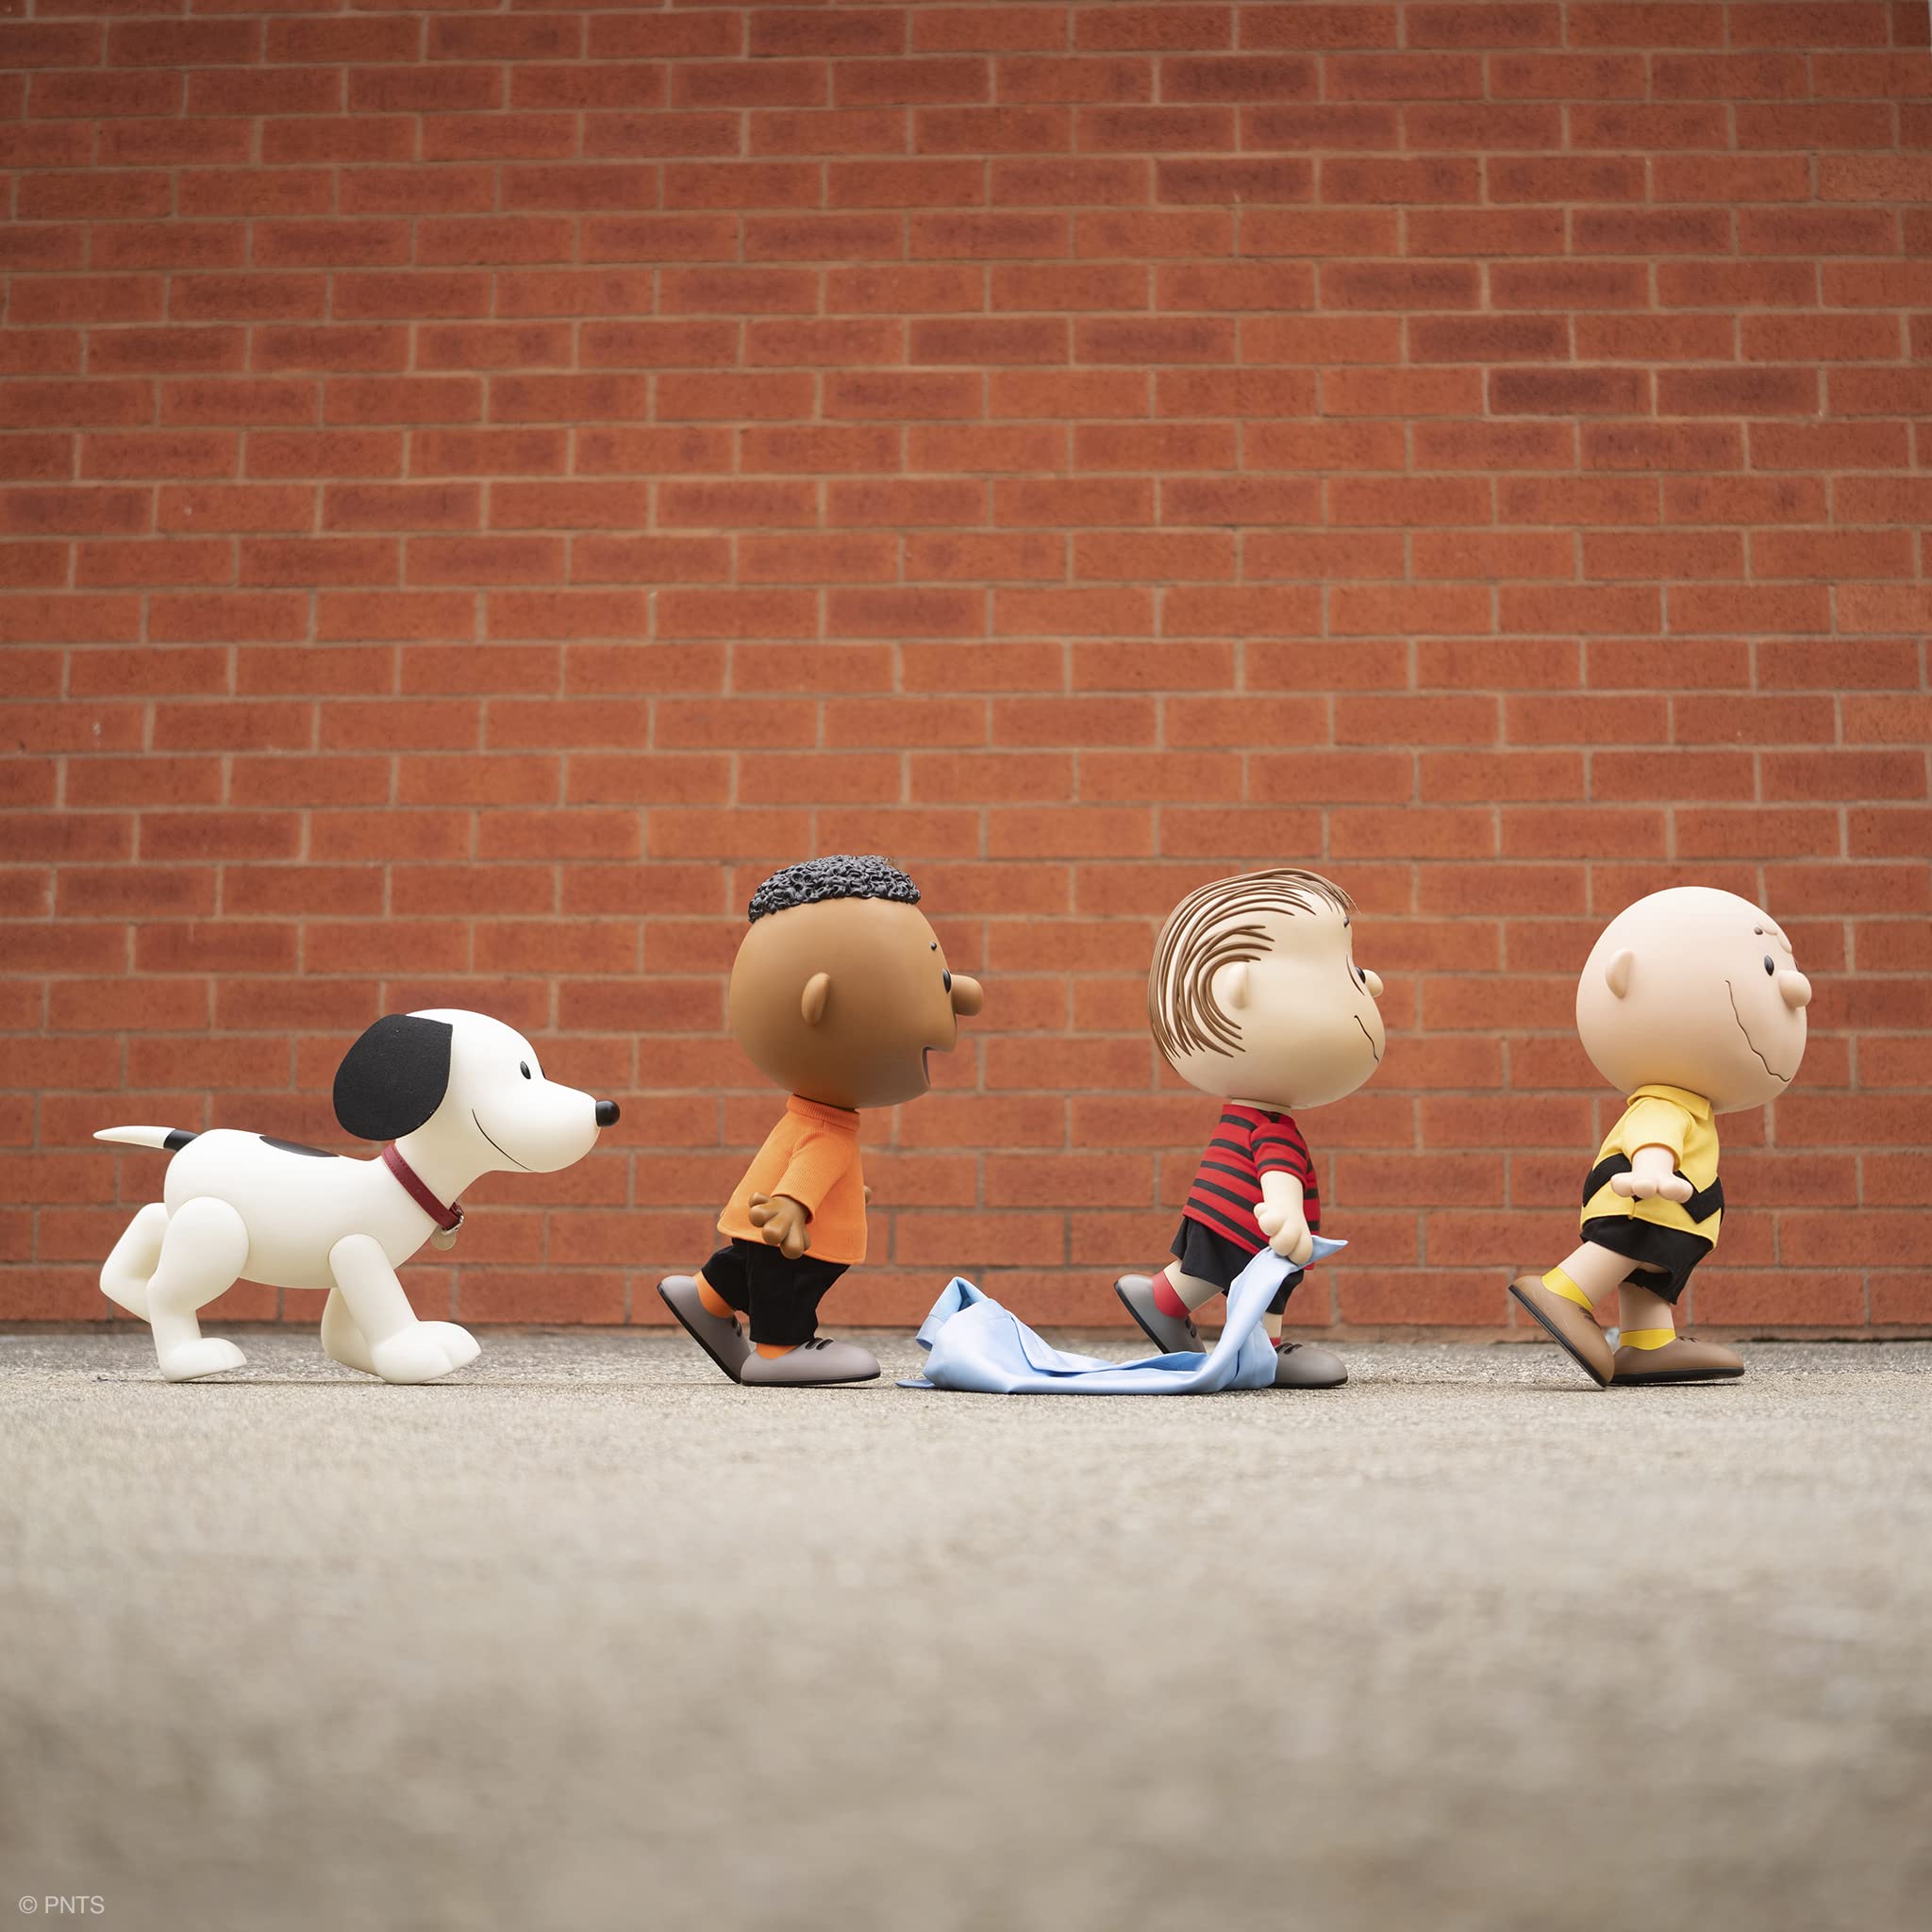 Super7 Peanuts Charlie Brown (Red Shirt) 16 in Supersize Figure